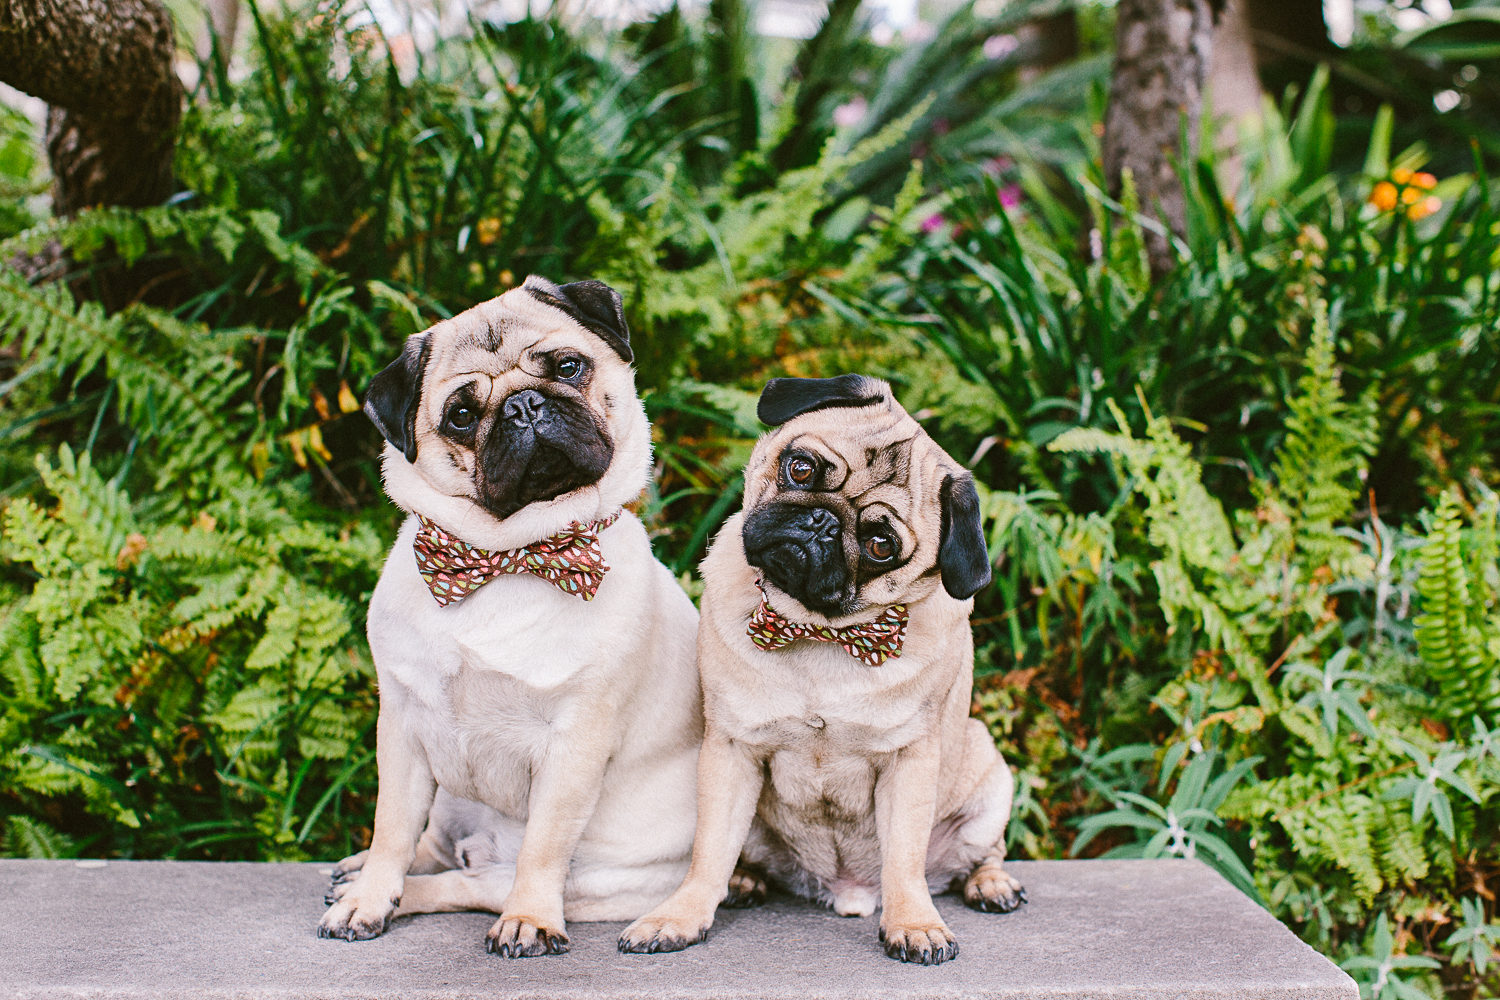 twoguineapigs_pet_photography_oh_jaffa_picnic_pugs_1500-19.jpg